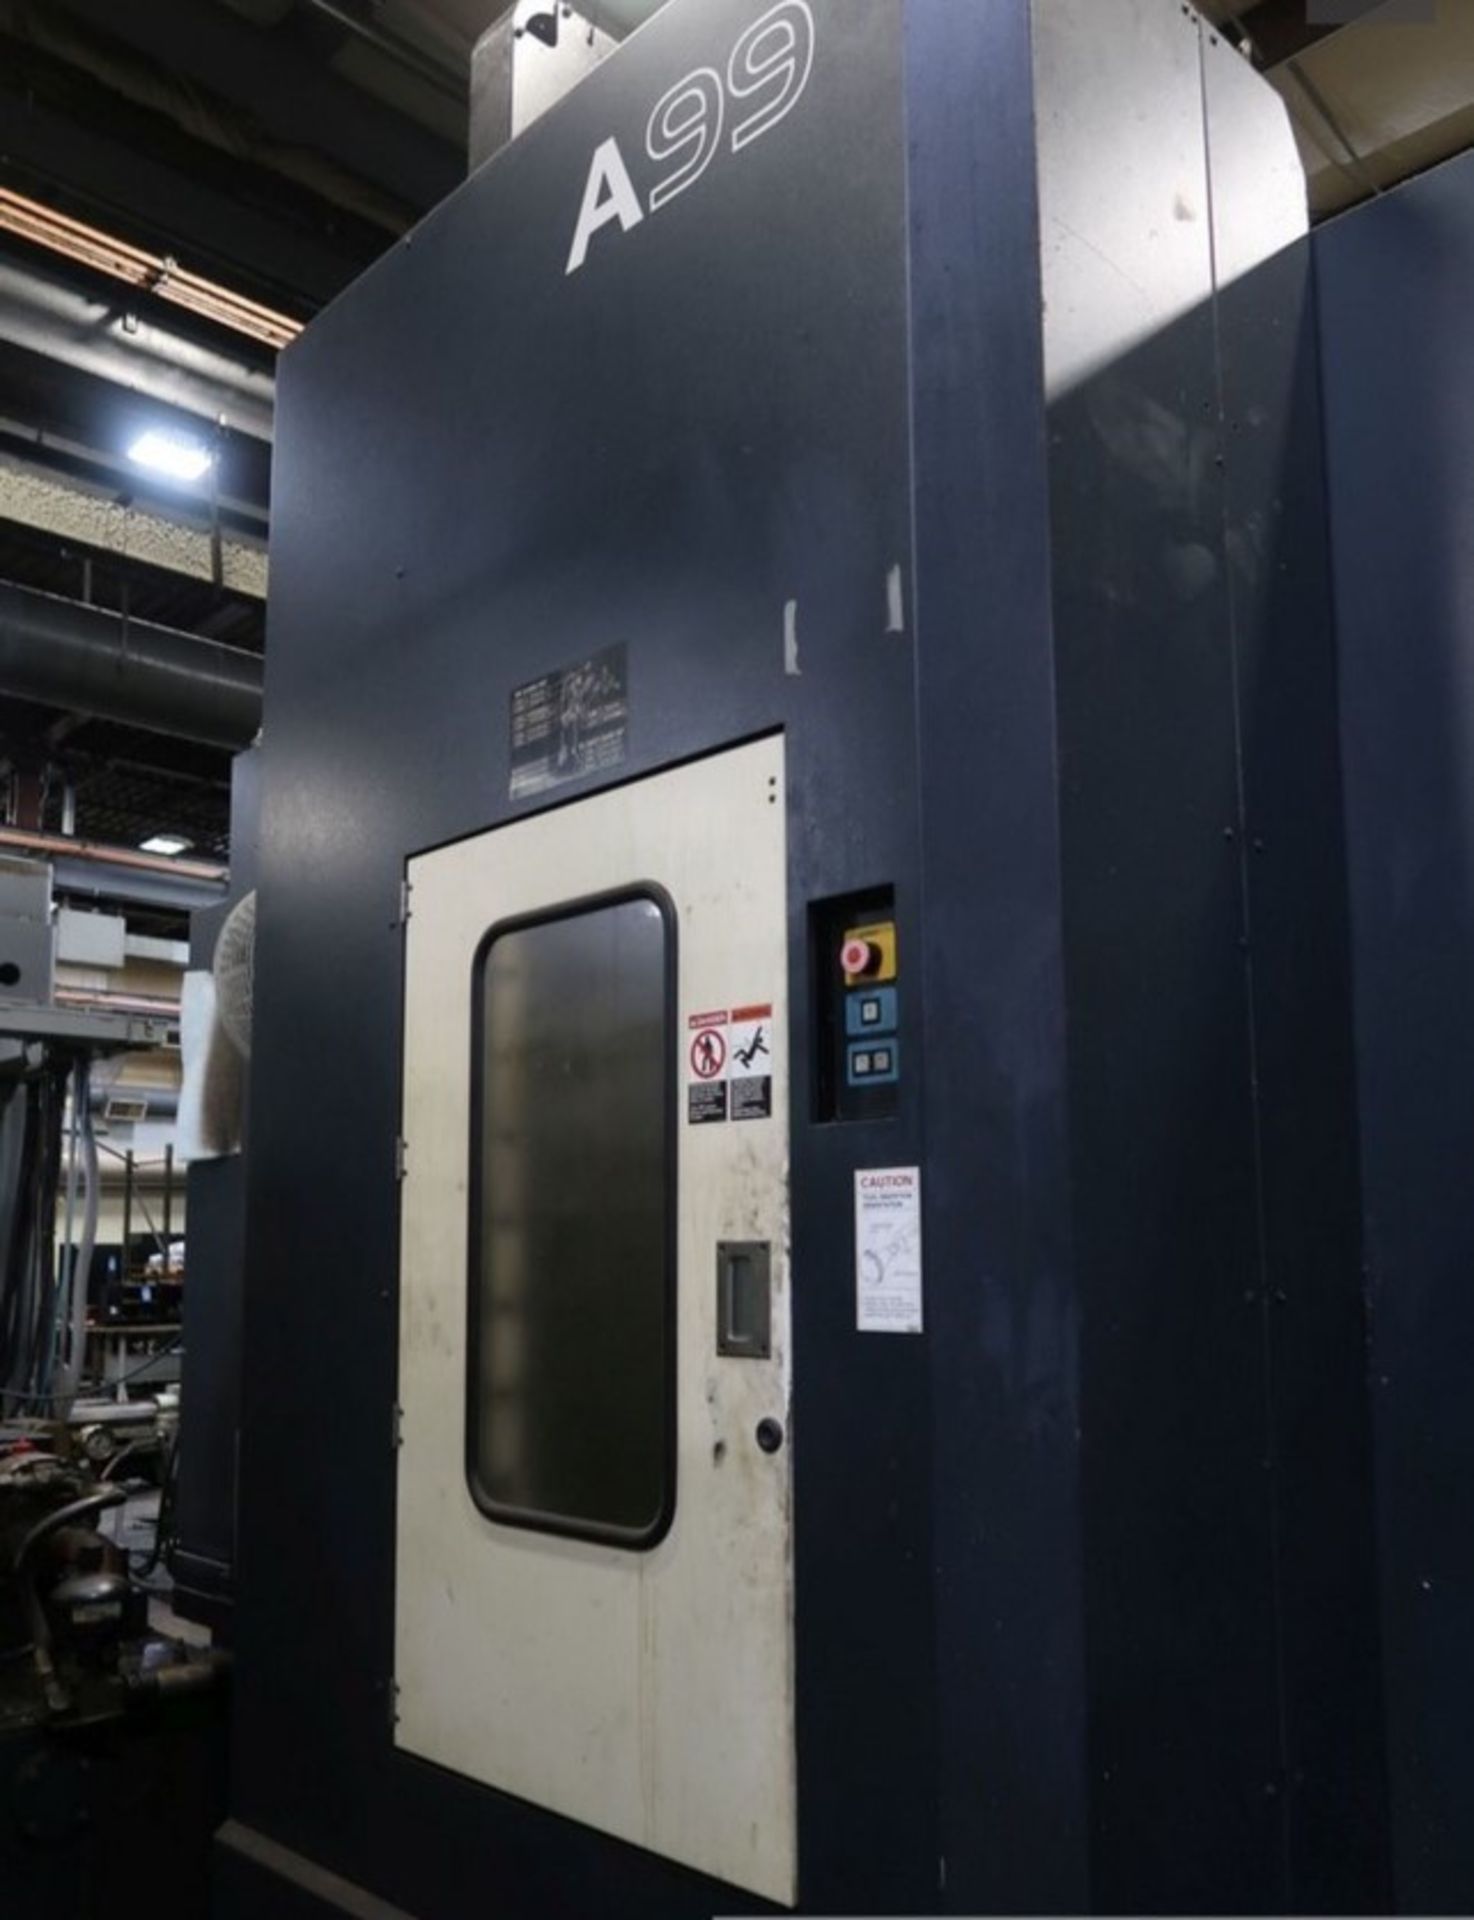 Makino A99 CNC Horizontal Machining Center w/ (2) Tombstones: Electro-Permanent Magnetic Chucks... - Image 15 of 27